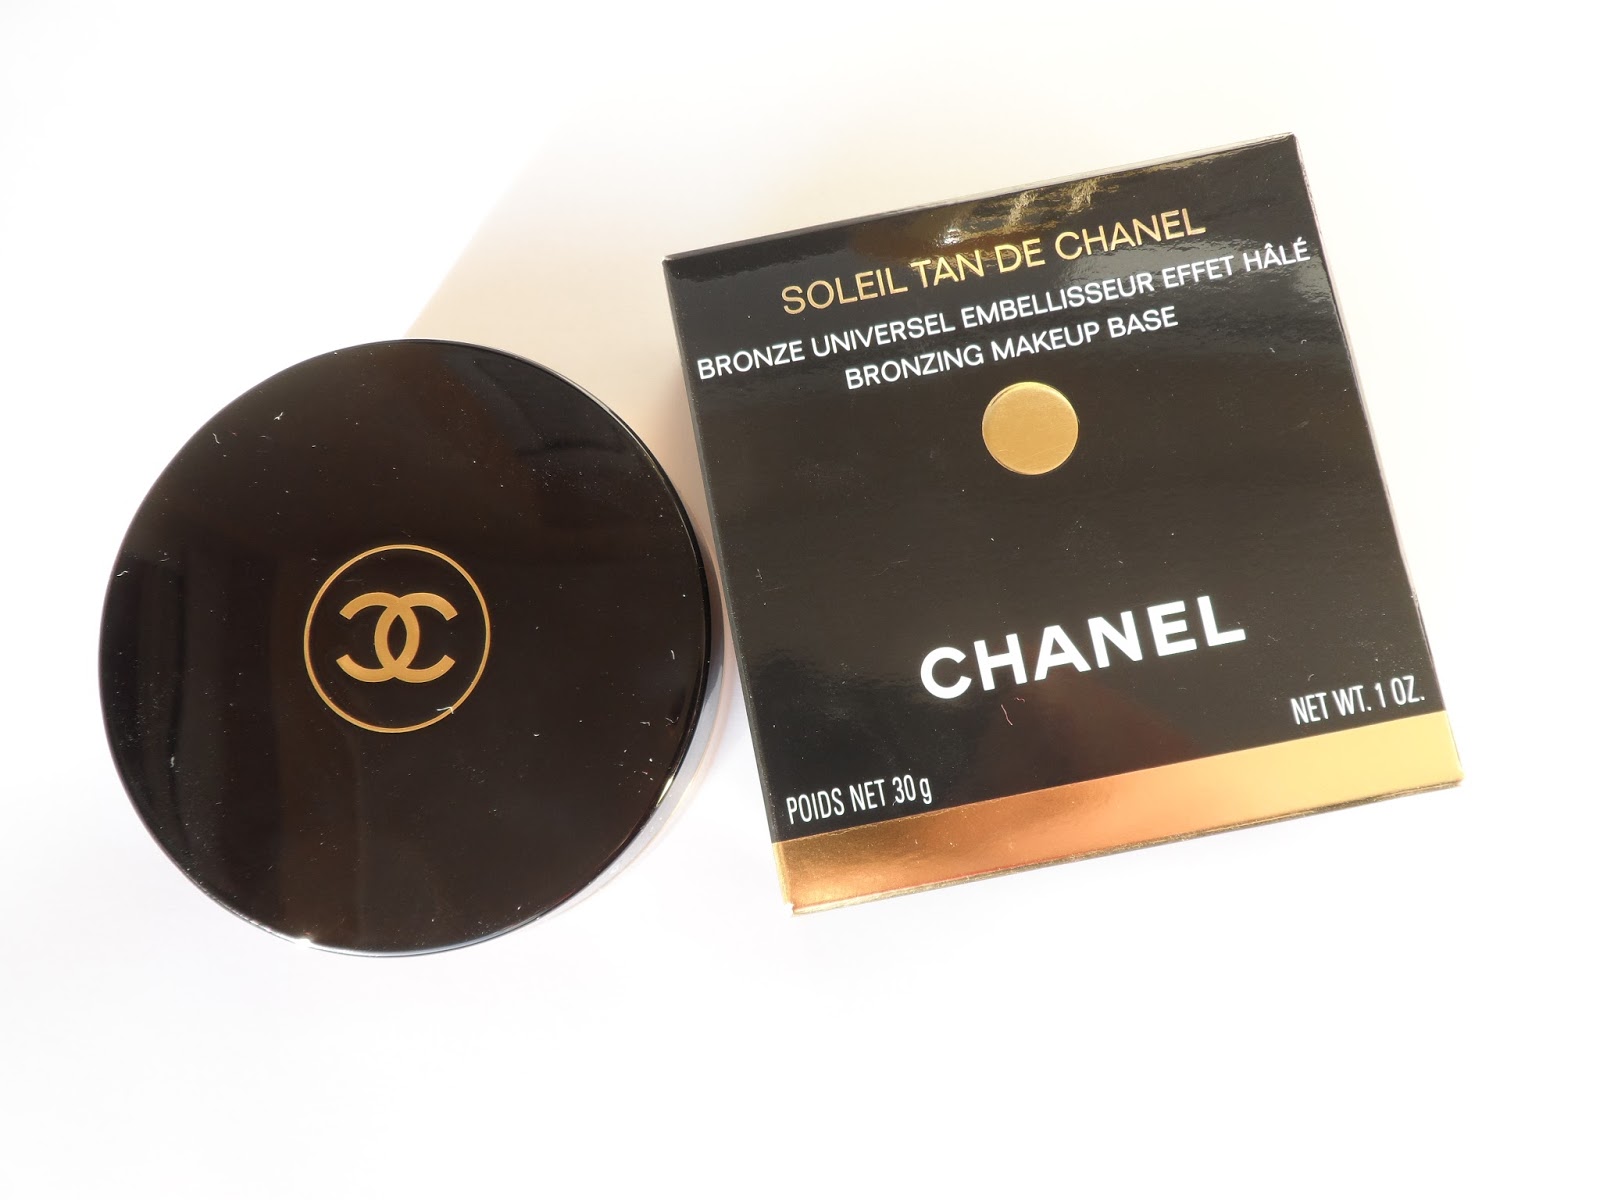 Usa where makeup base review chanel online places